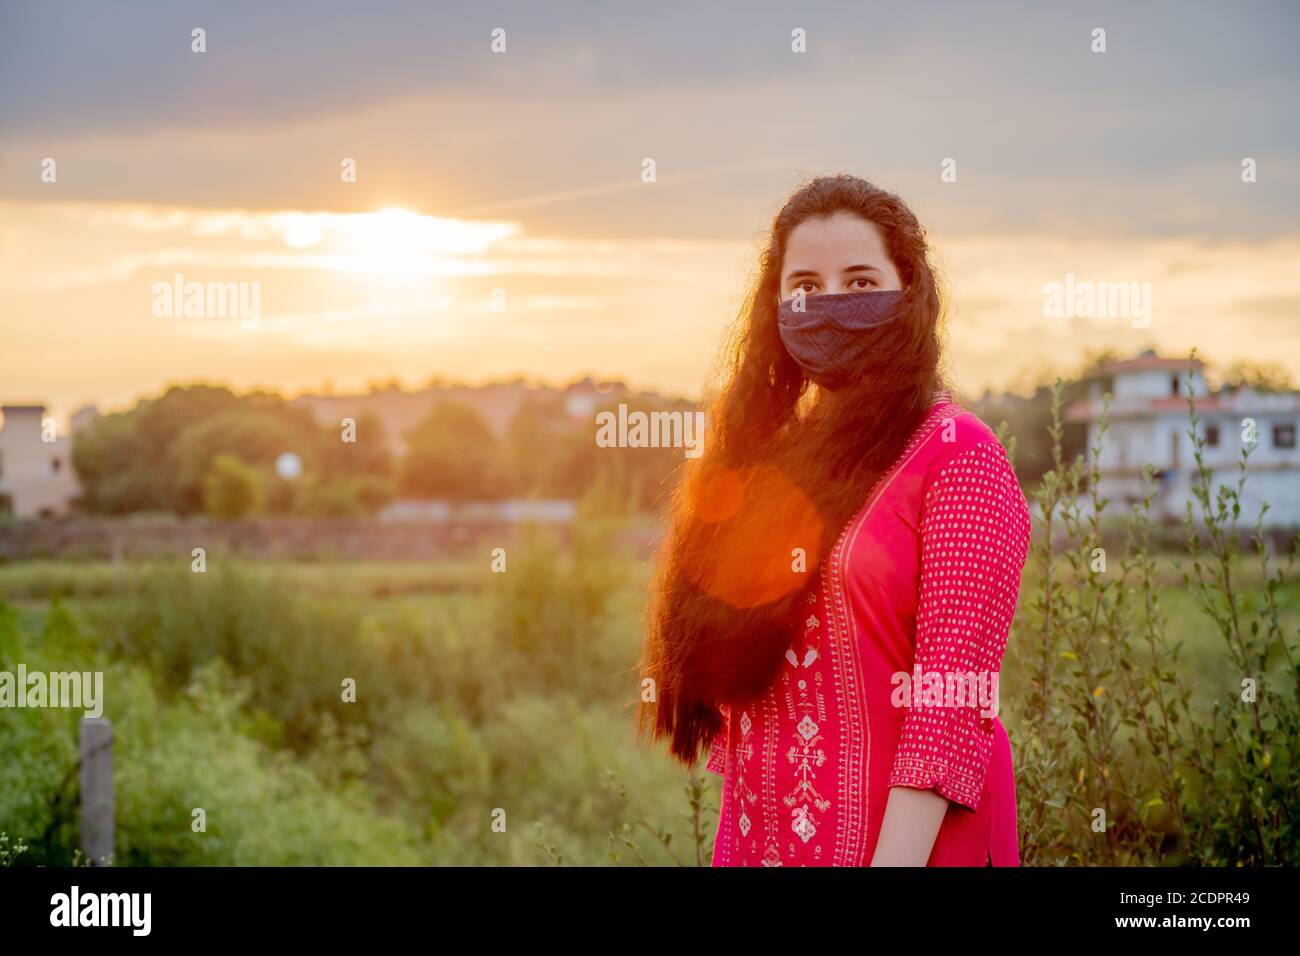 Young Indian girl wearing a mask, indian salwar kameez standing with a field and a beautiful sunset behind her Stock Photo